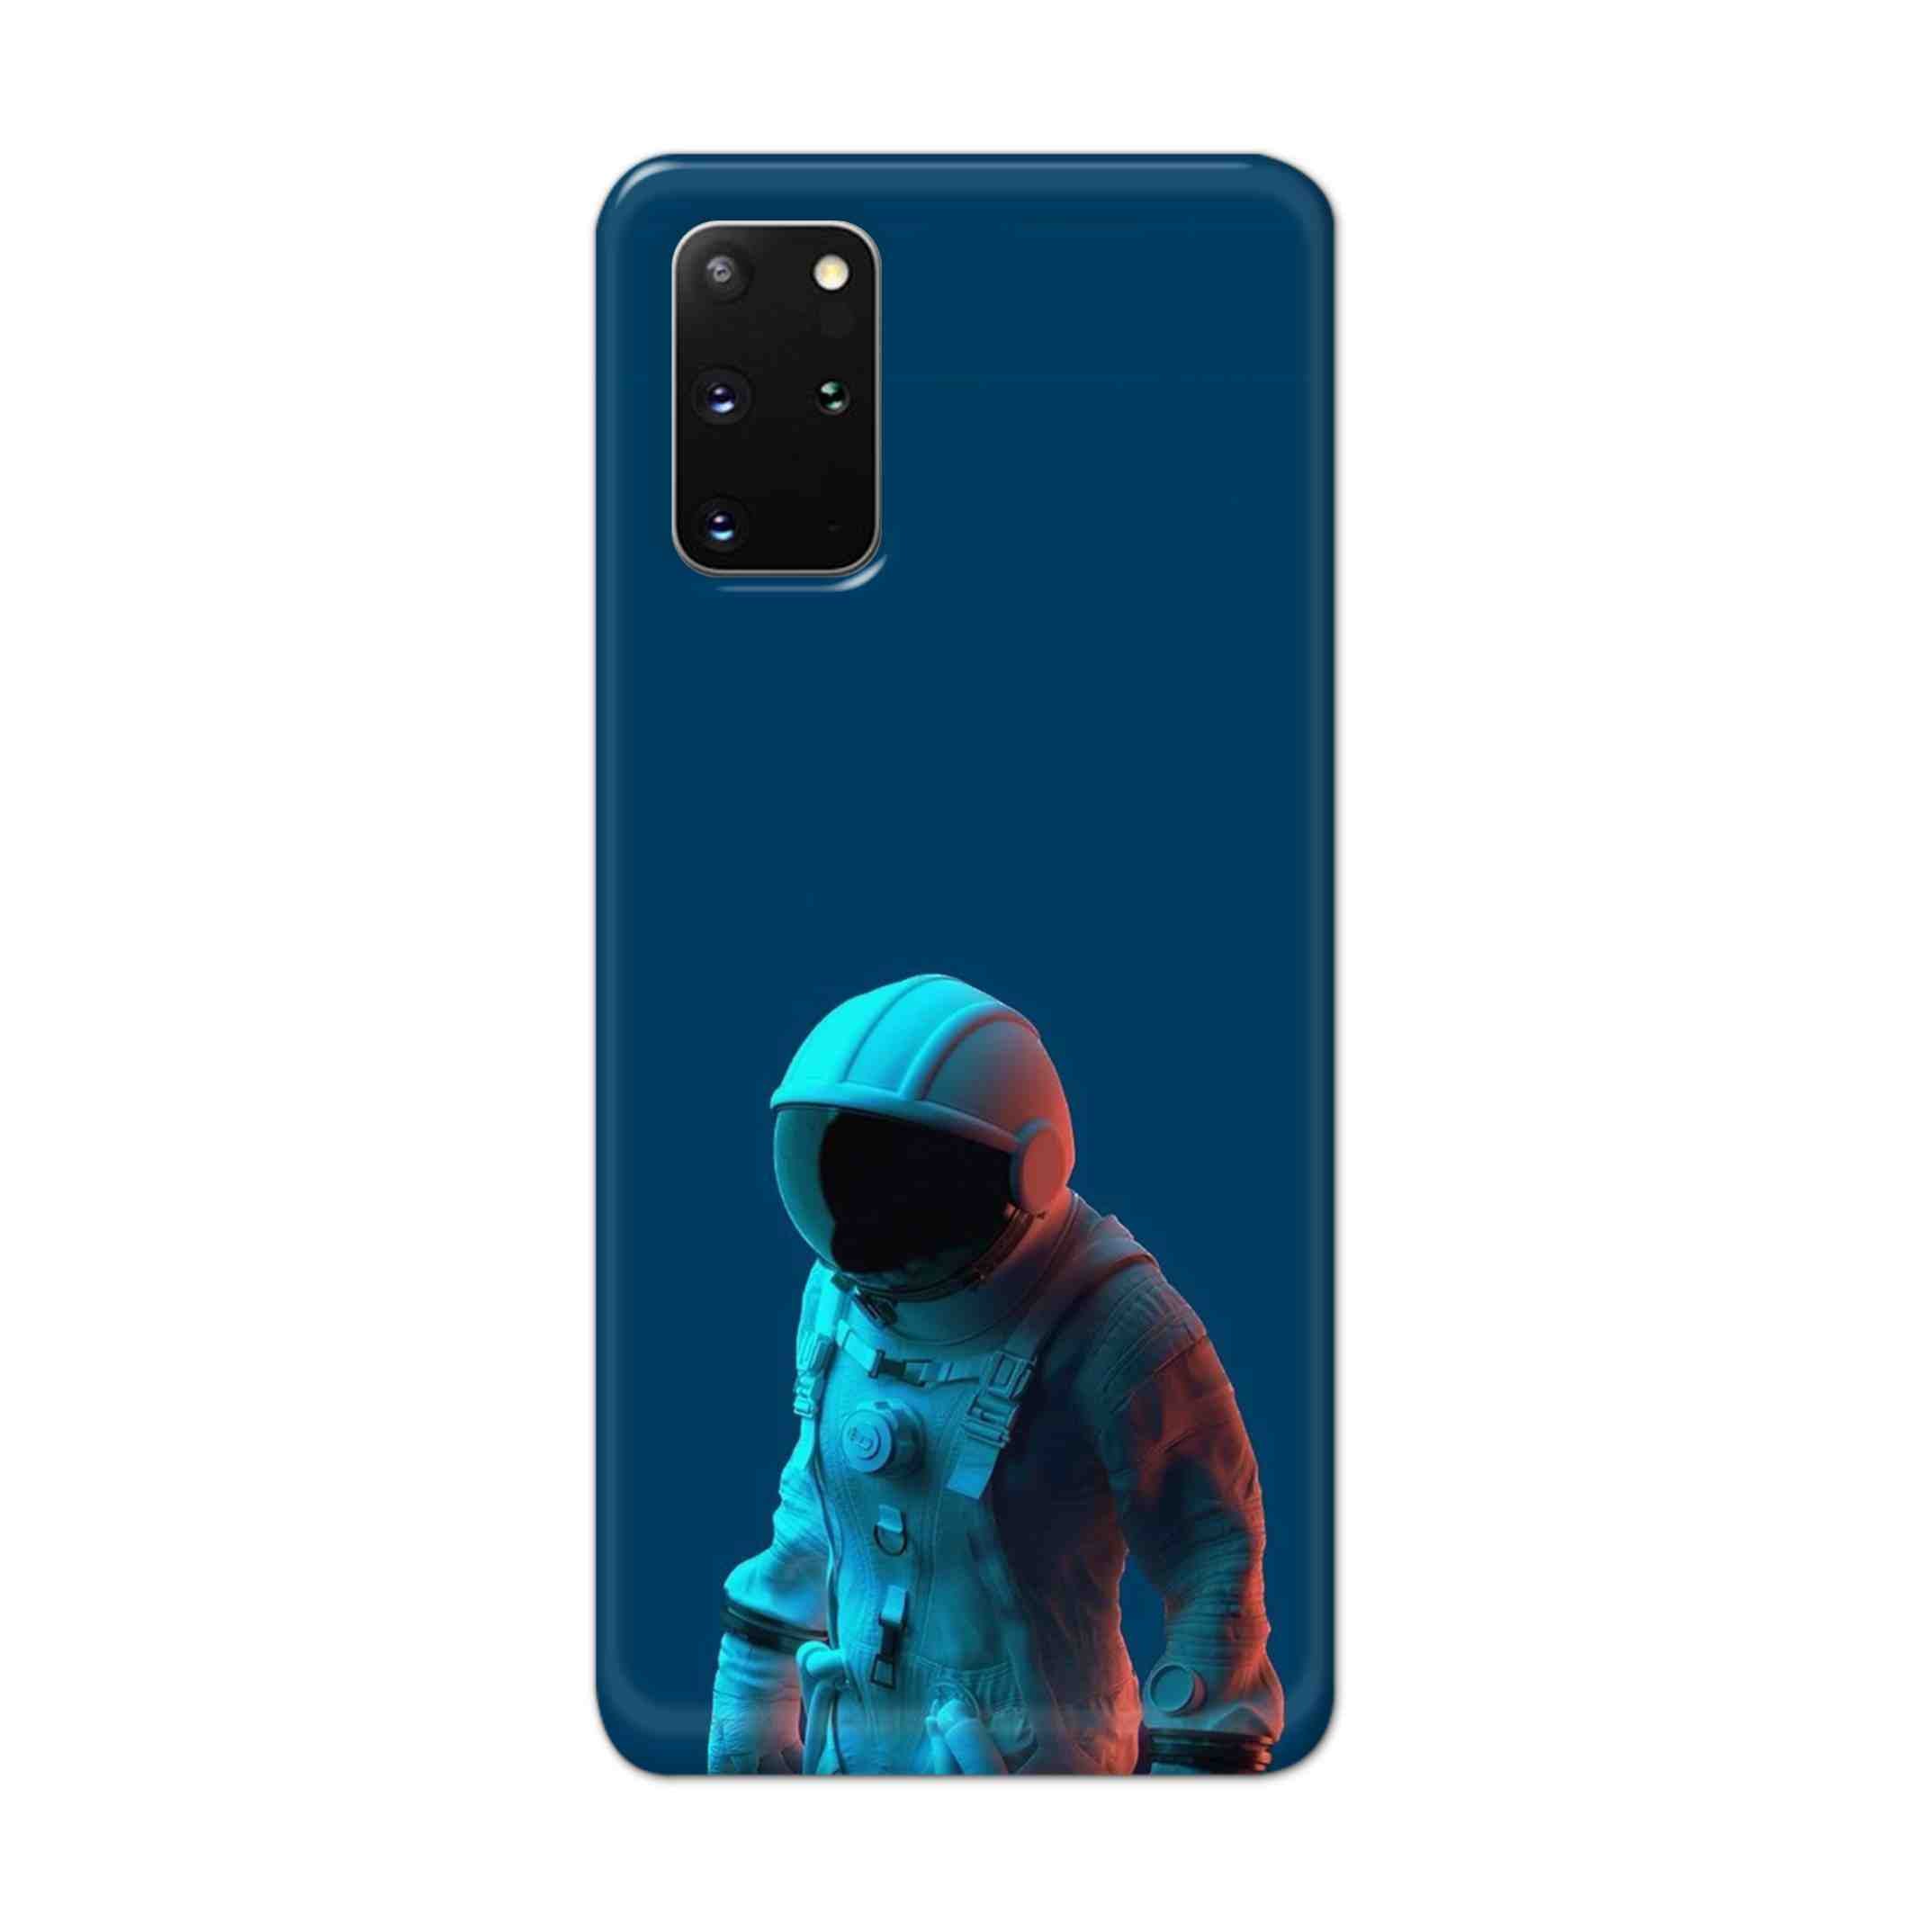 Buy Blue Astronaut Hard Back Mobile Phone Case Cover For Samsung Galaxy S20 Plus Online